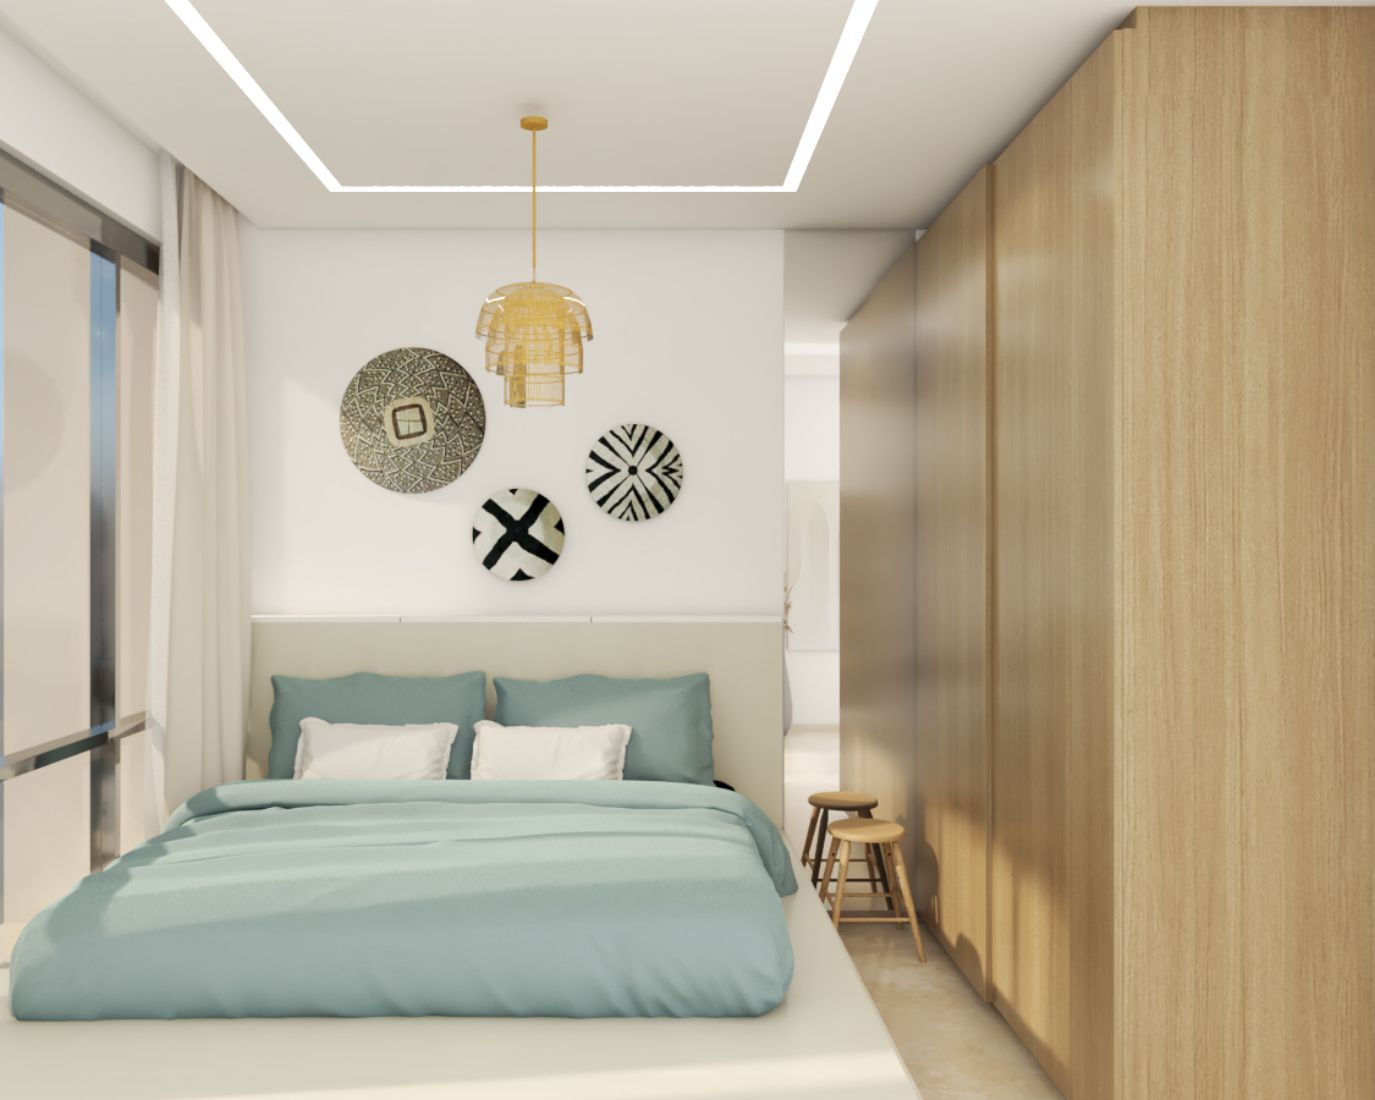 Contemporary Bedroom Design With White Walls And A Spacious Wooden Wardrobe